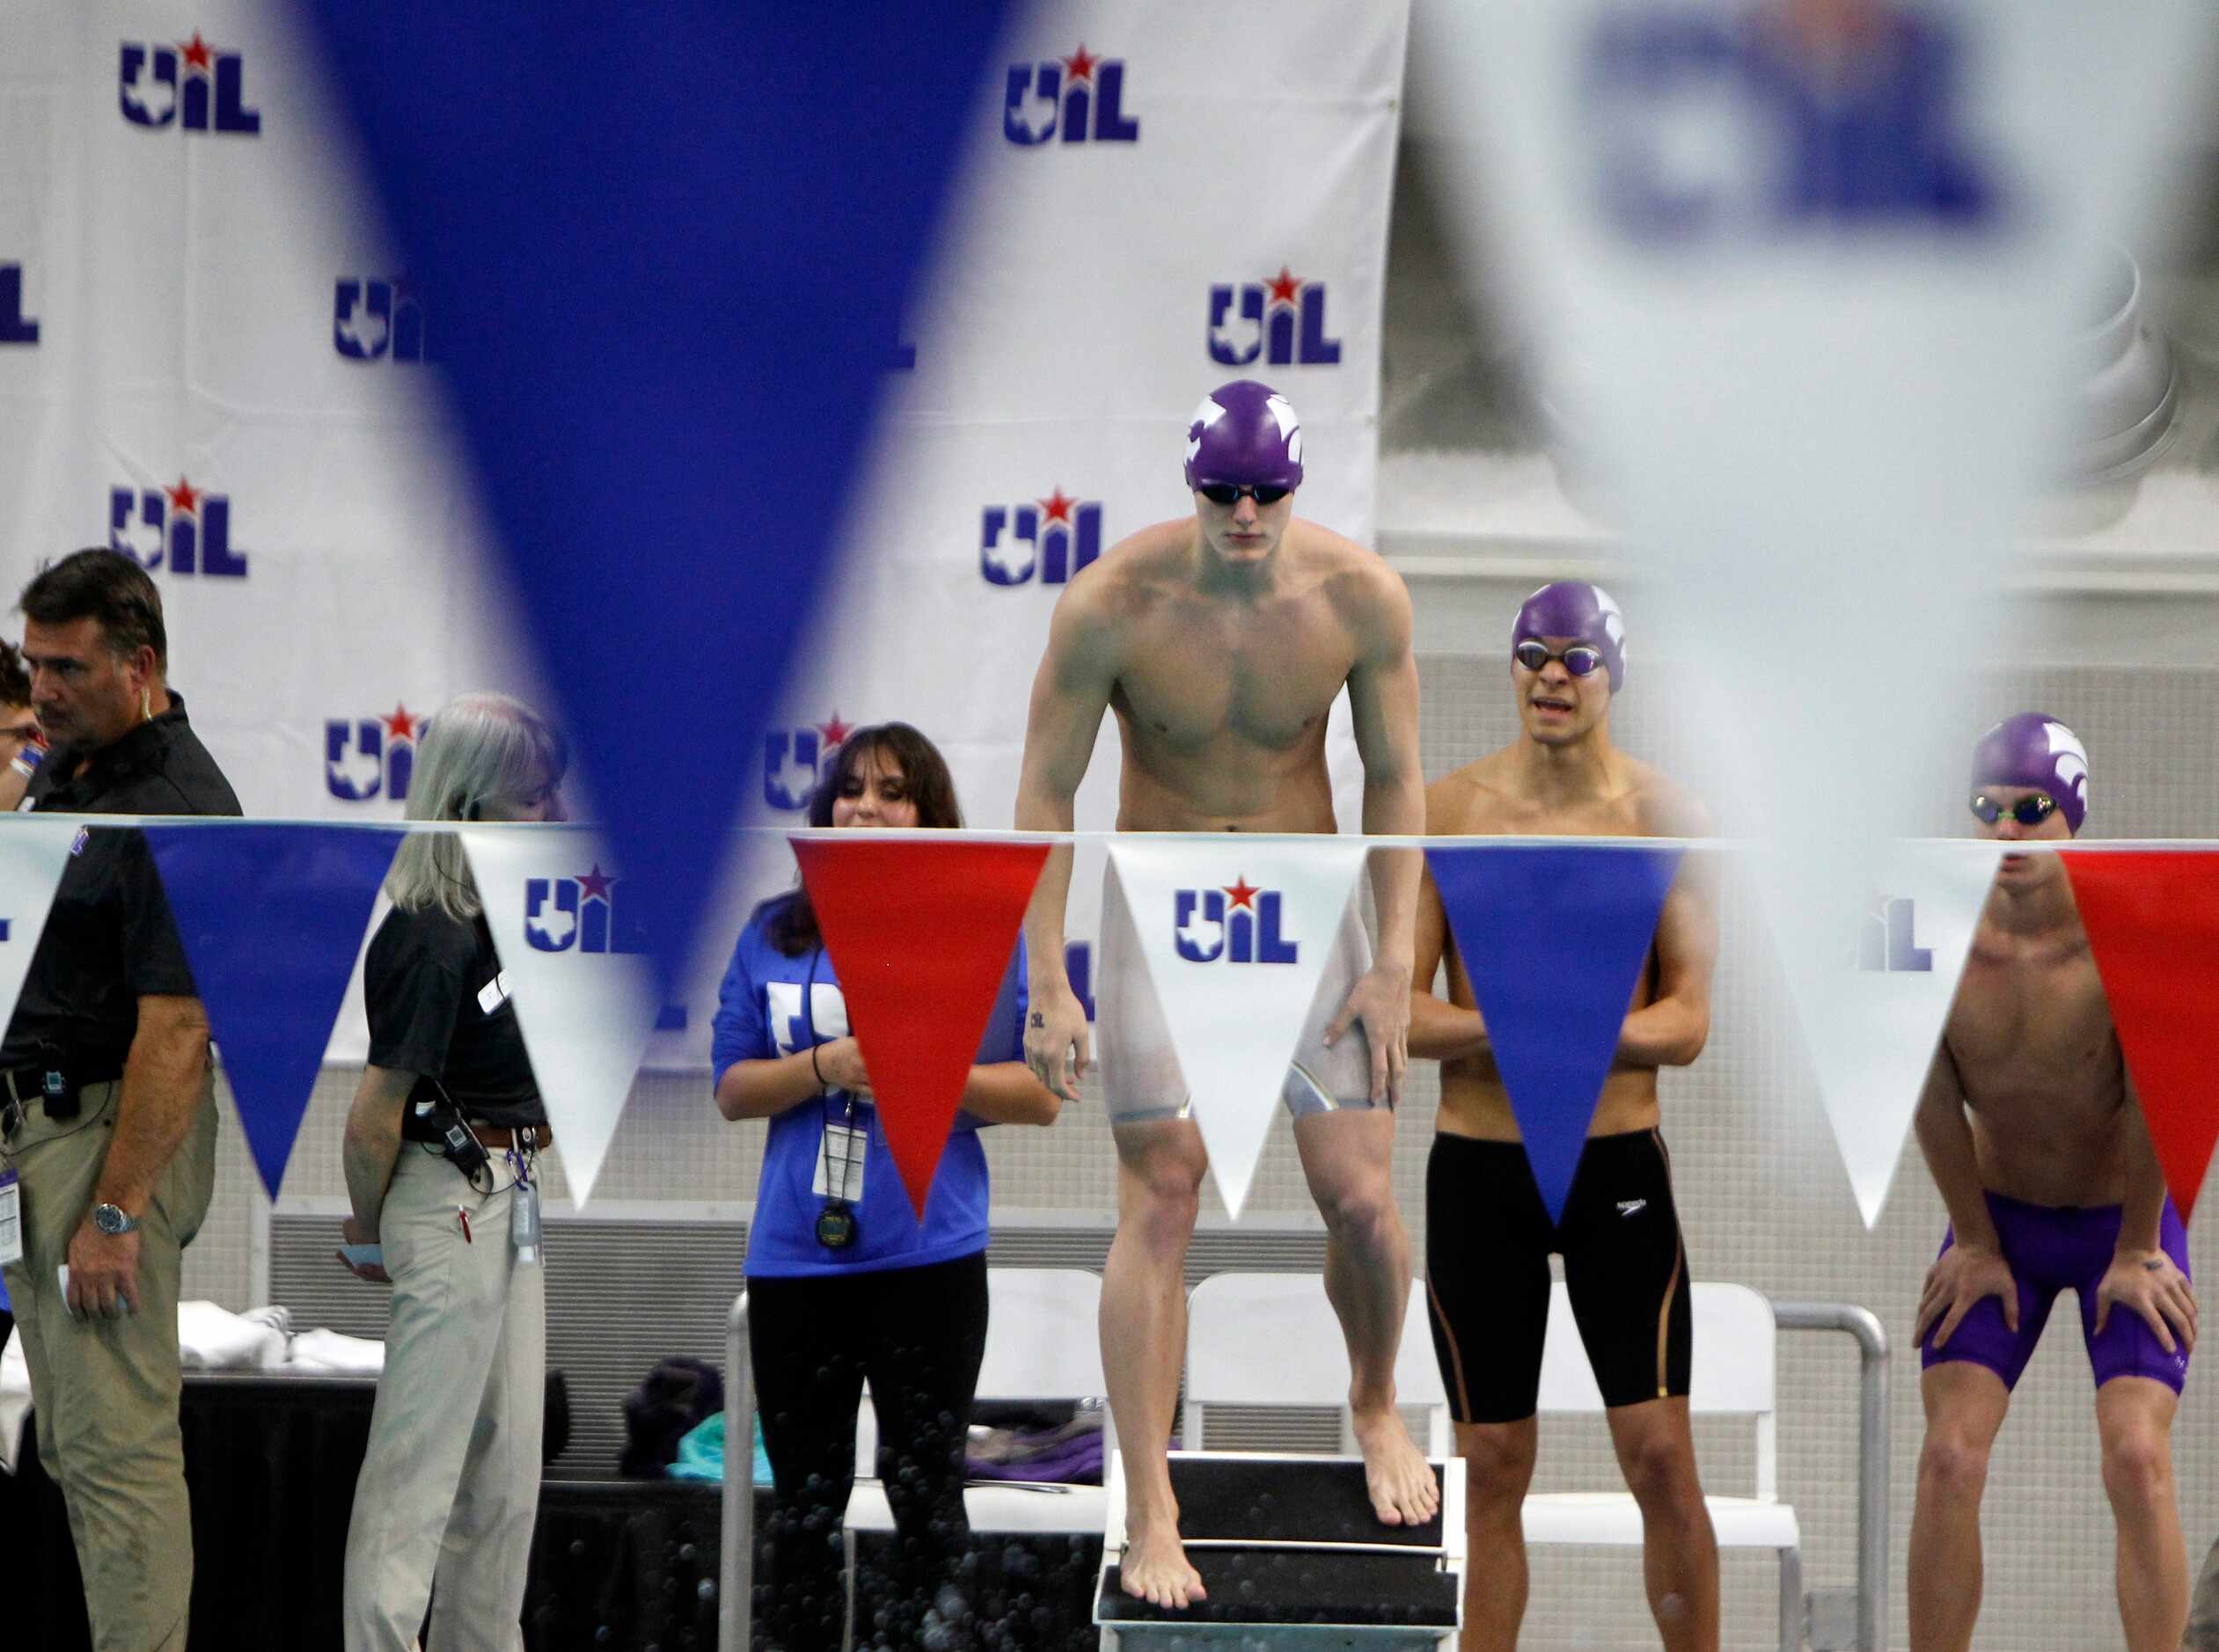 A swimmer is poised on the blocks behind a UIL flag draped across the pool during a 5A relay...